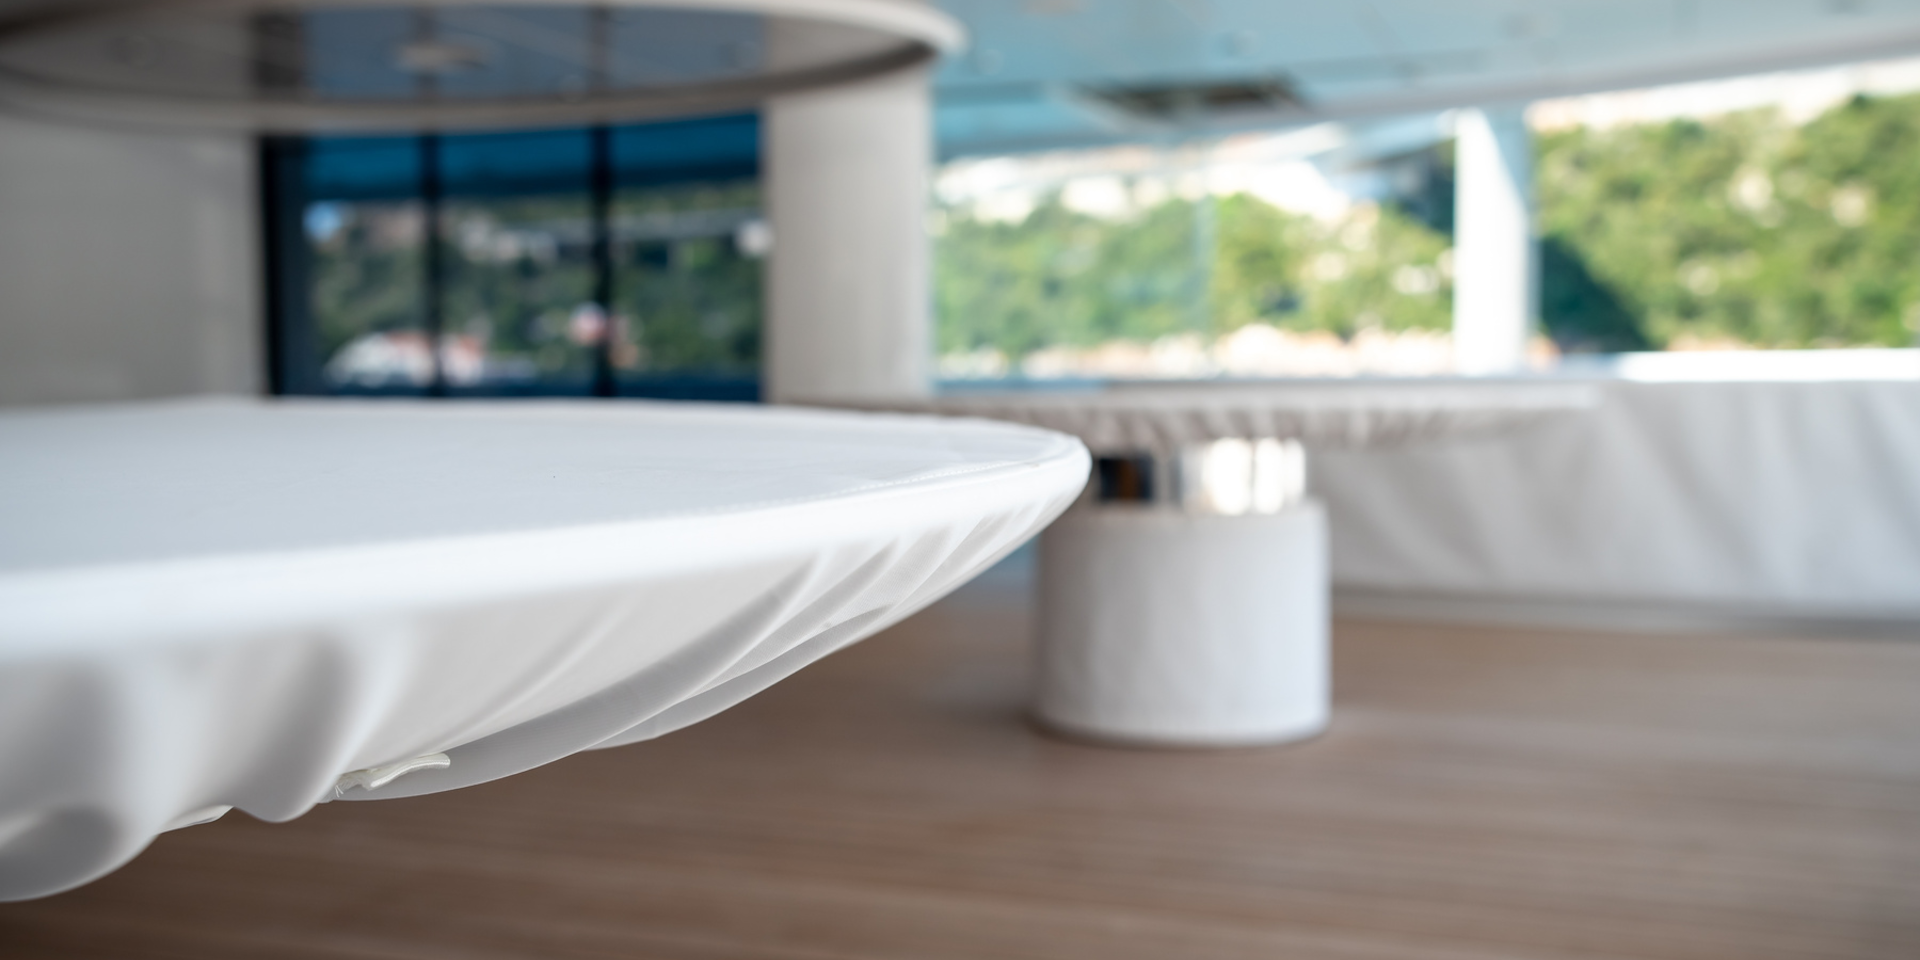 Keeping superyacht deck furniture safe from sun, rain and wind with durable water-repellant, easy to clean protective covers.